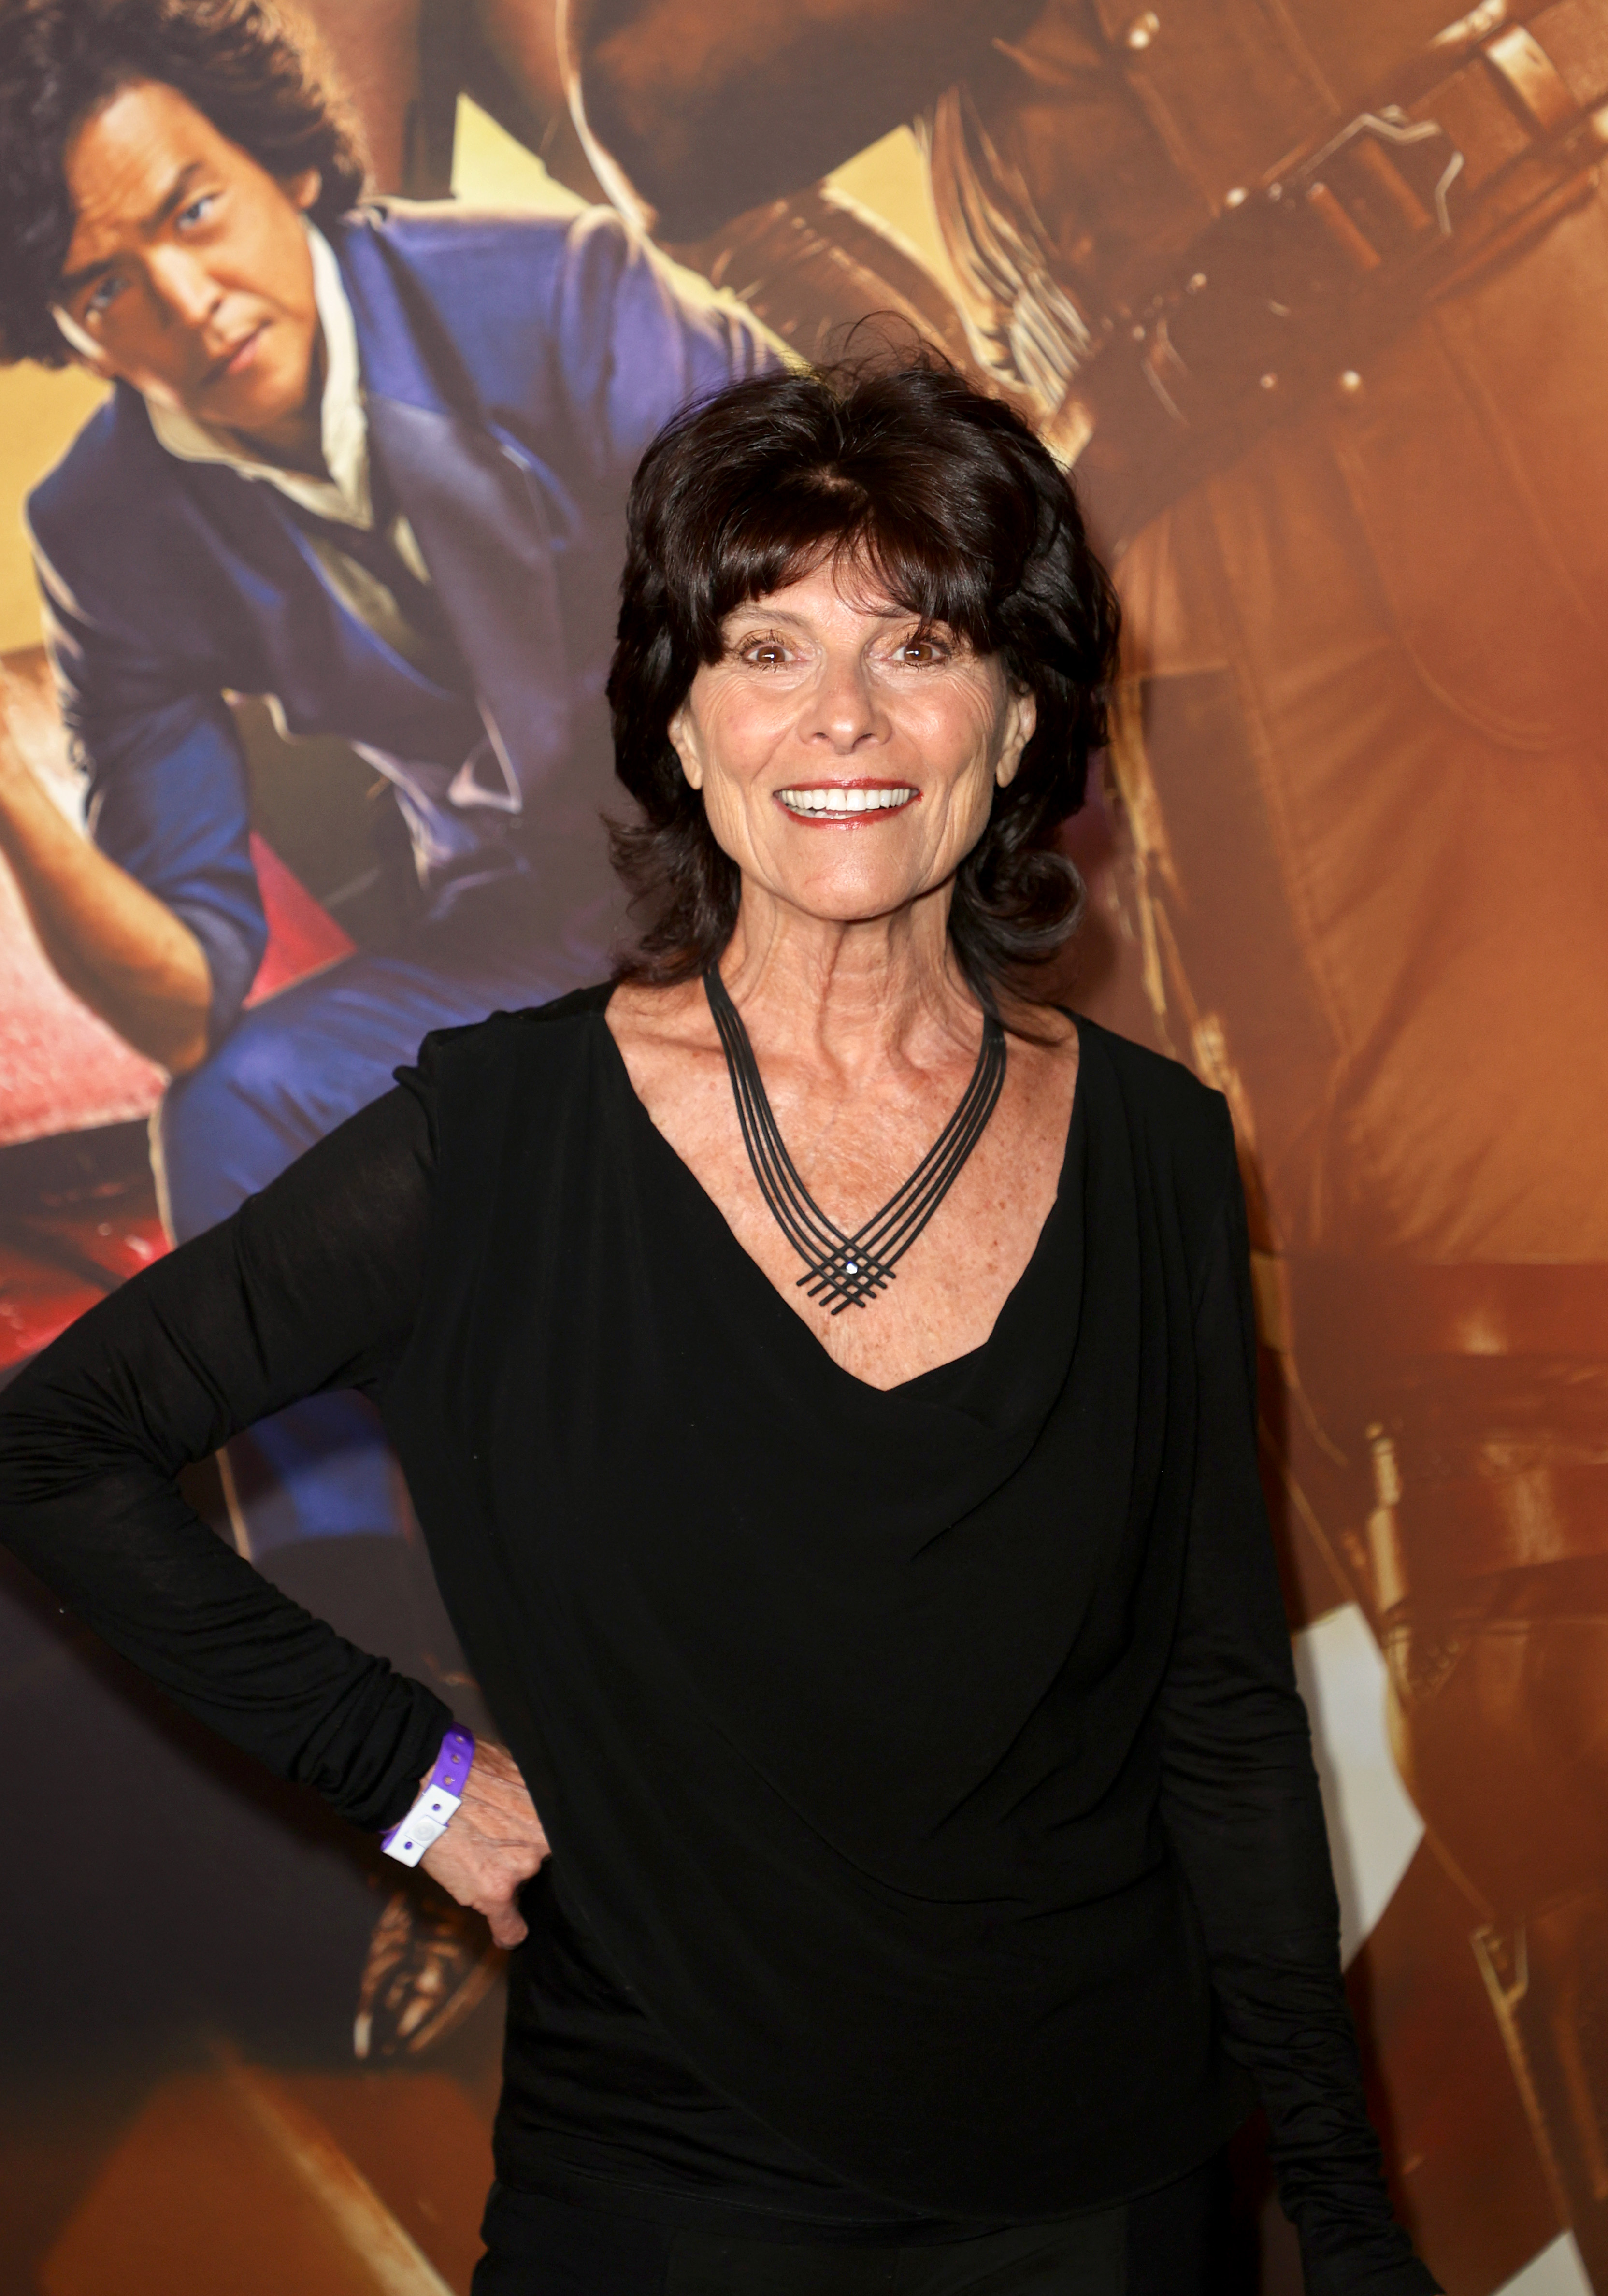 Adrienne Barbeau attends the premiere of "Cowboy Bebop" on November 11, 2021 | Source: Getty Images